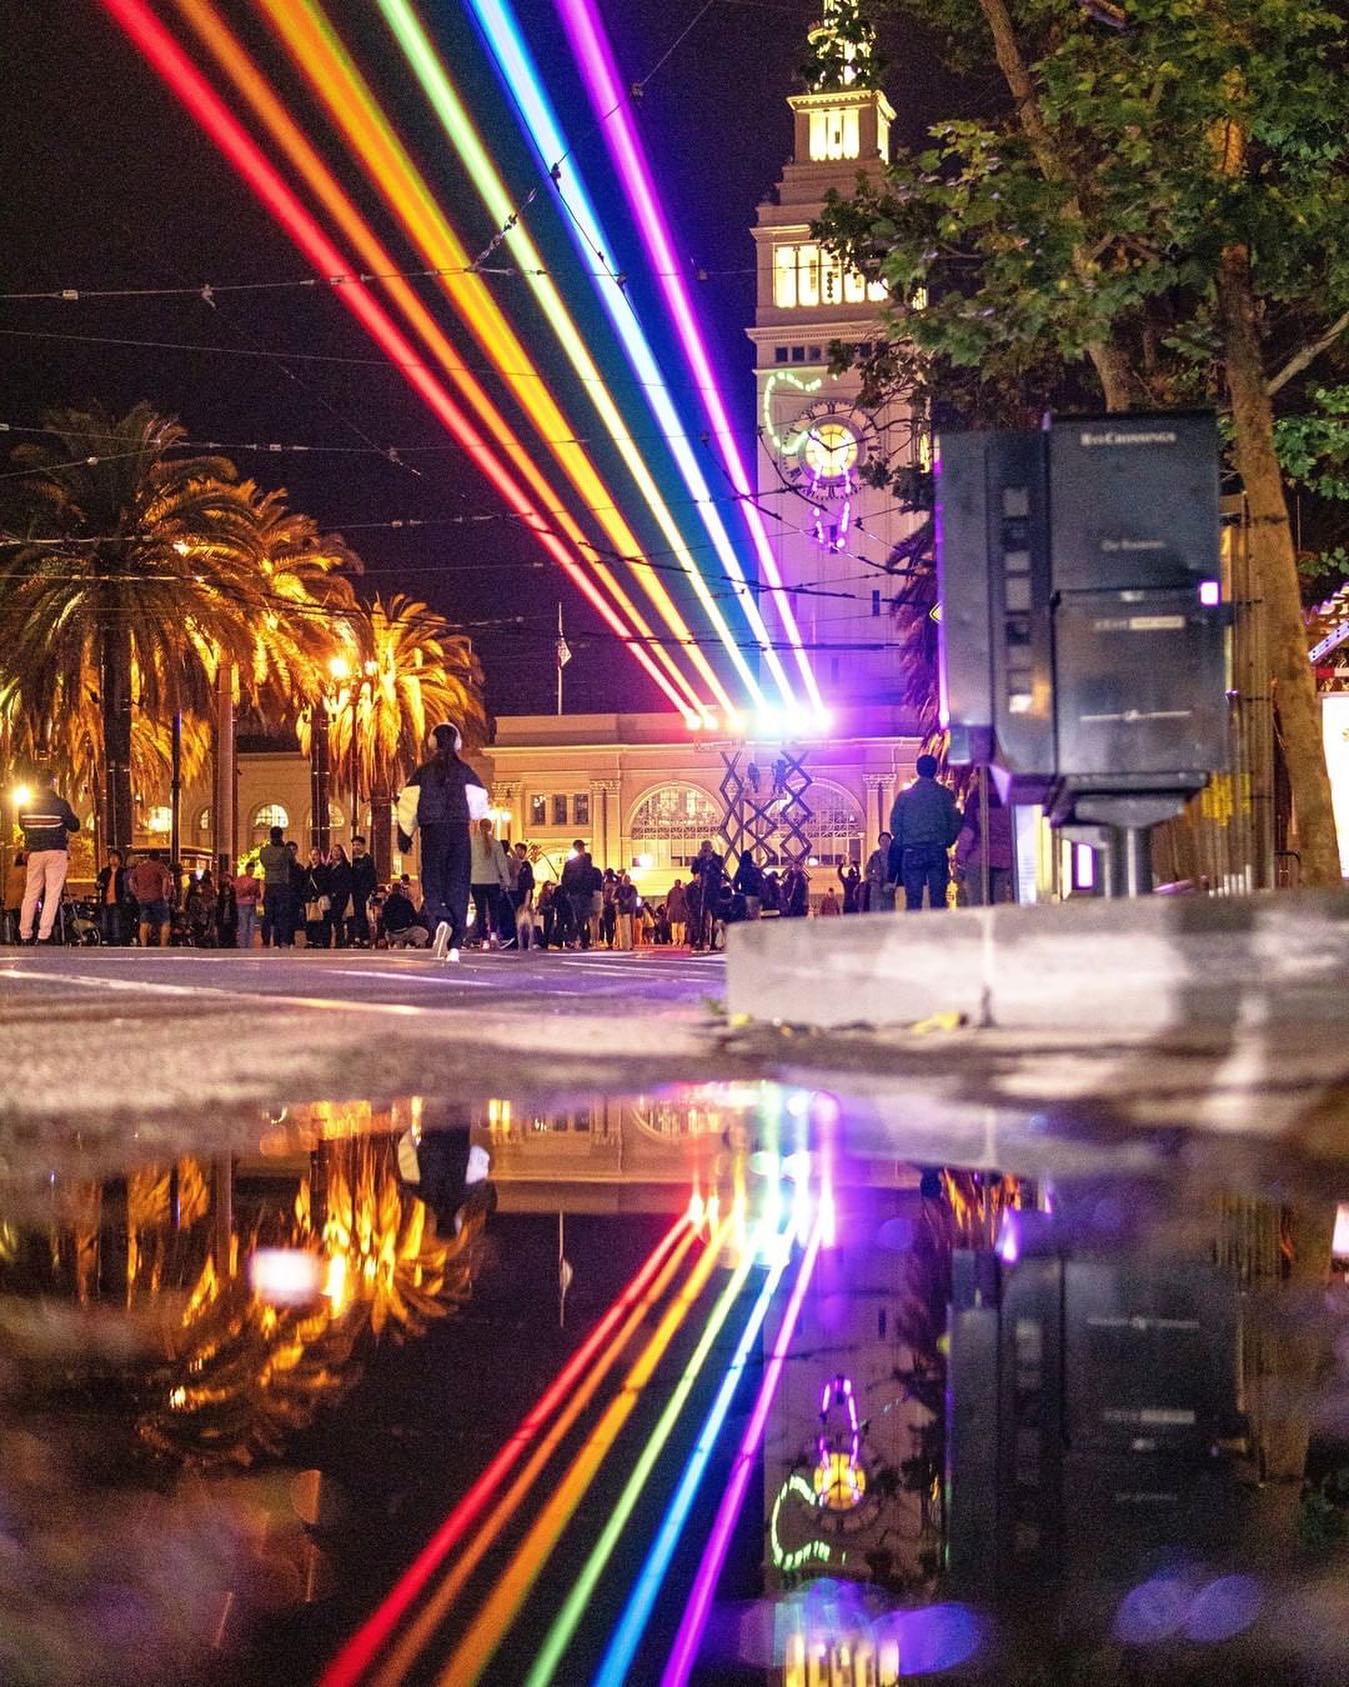 Rainbow laser beams shining over Downtown San Francisco are reflected in a puddle on the street below.